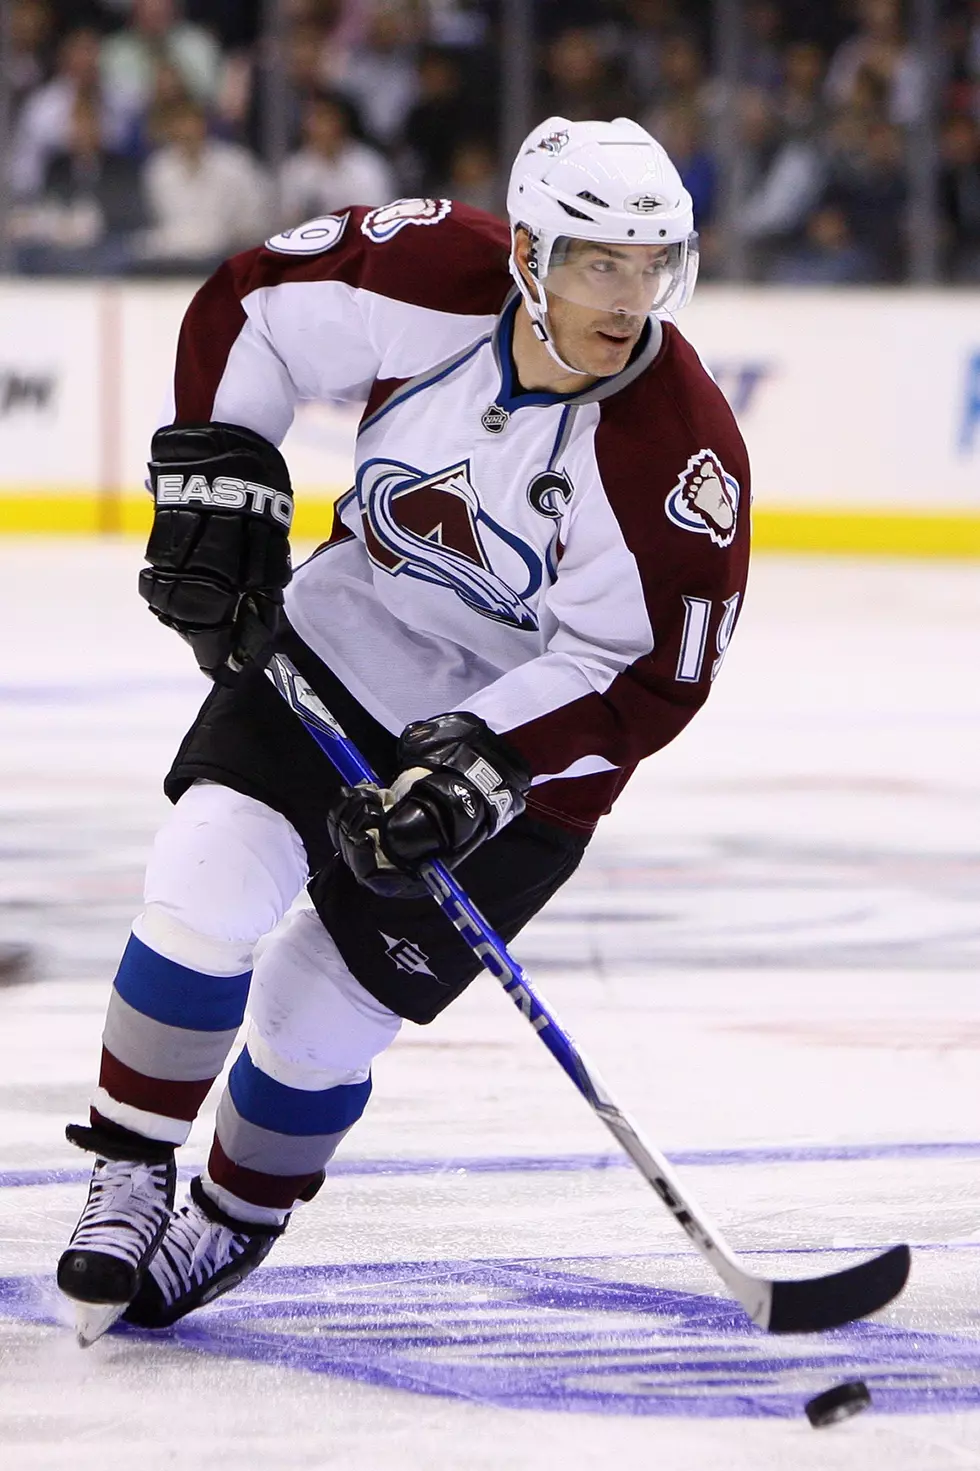 Colorado Avalanche Forward to be Inducted into NHL Hall of Fame